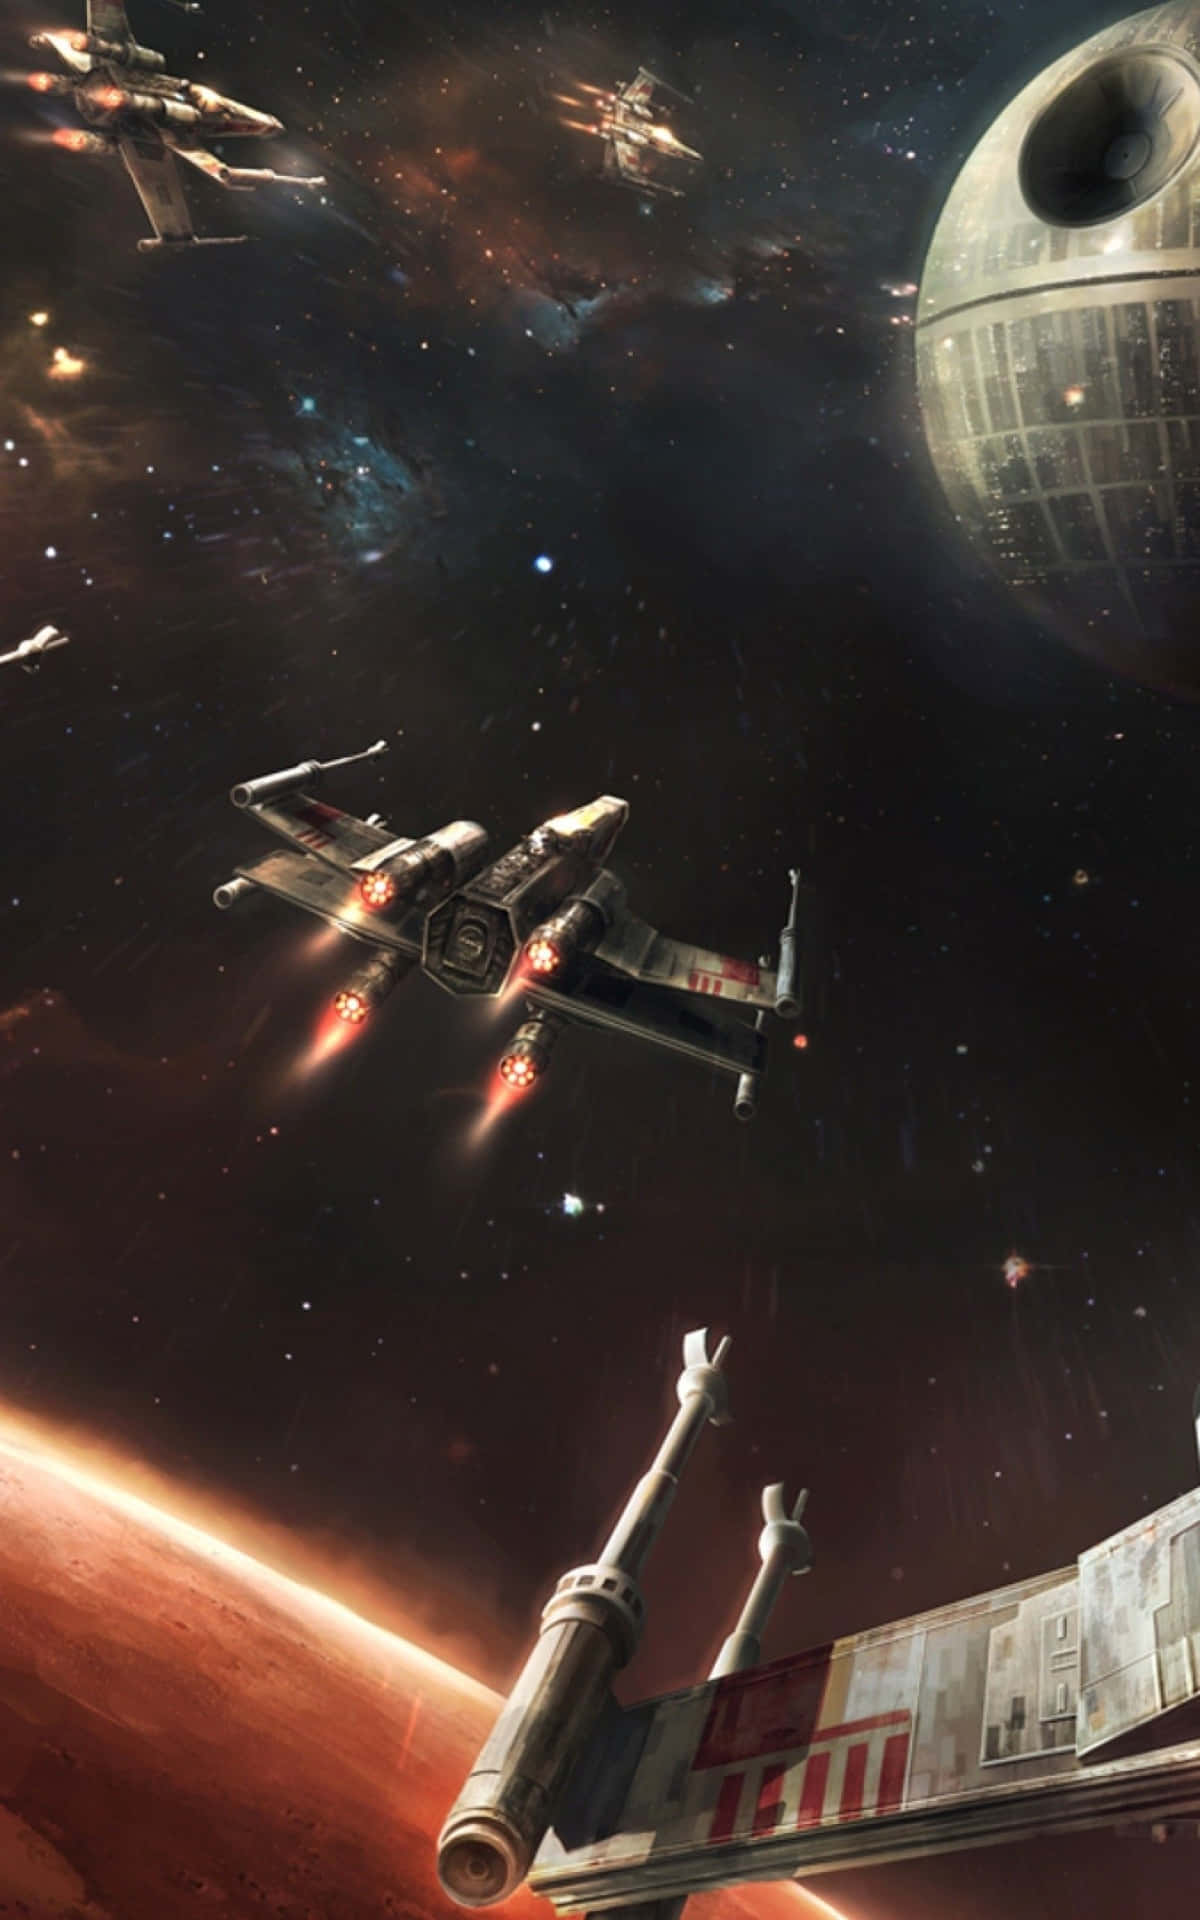 Command the Scene with the Iconic X-wing Fighter" Wallpaper